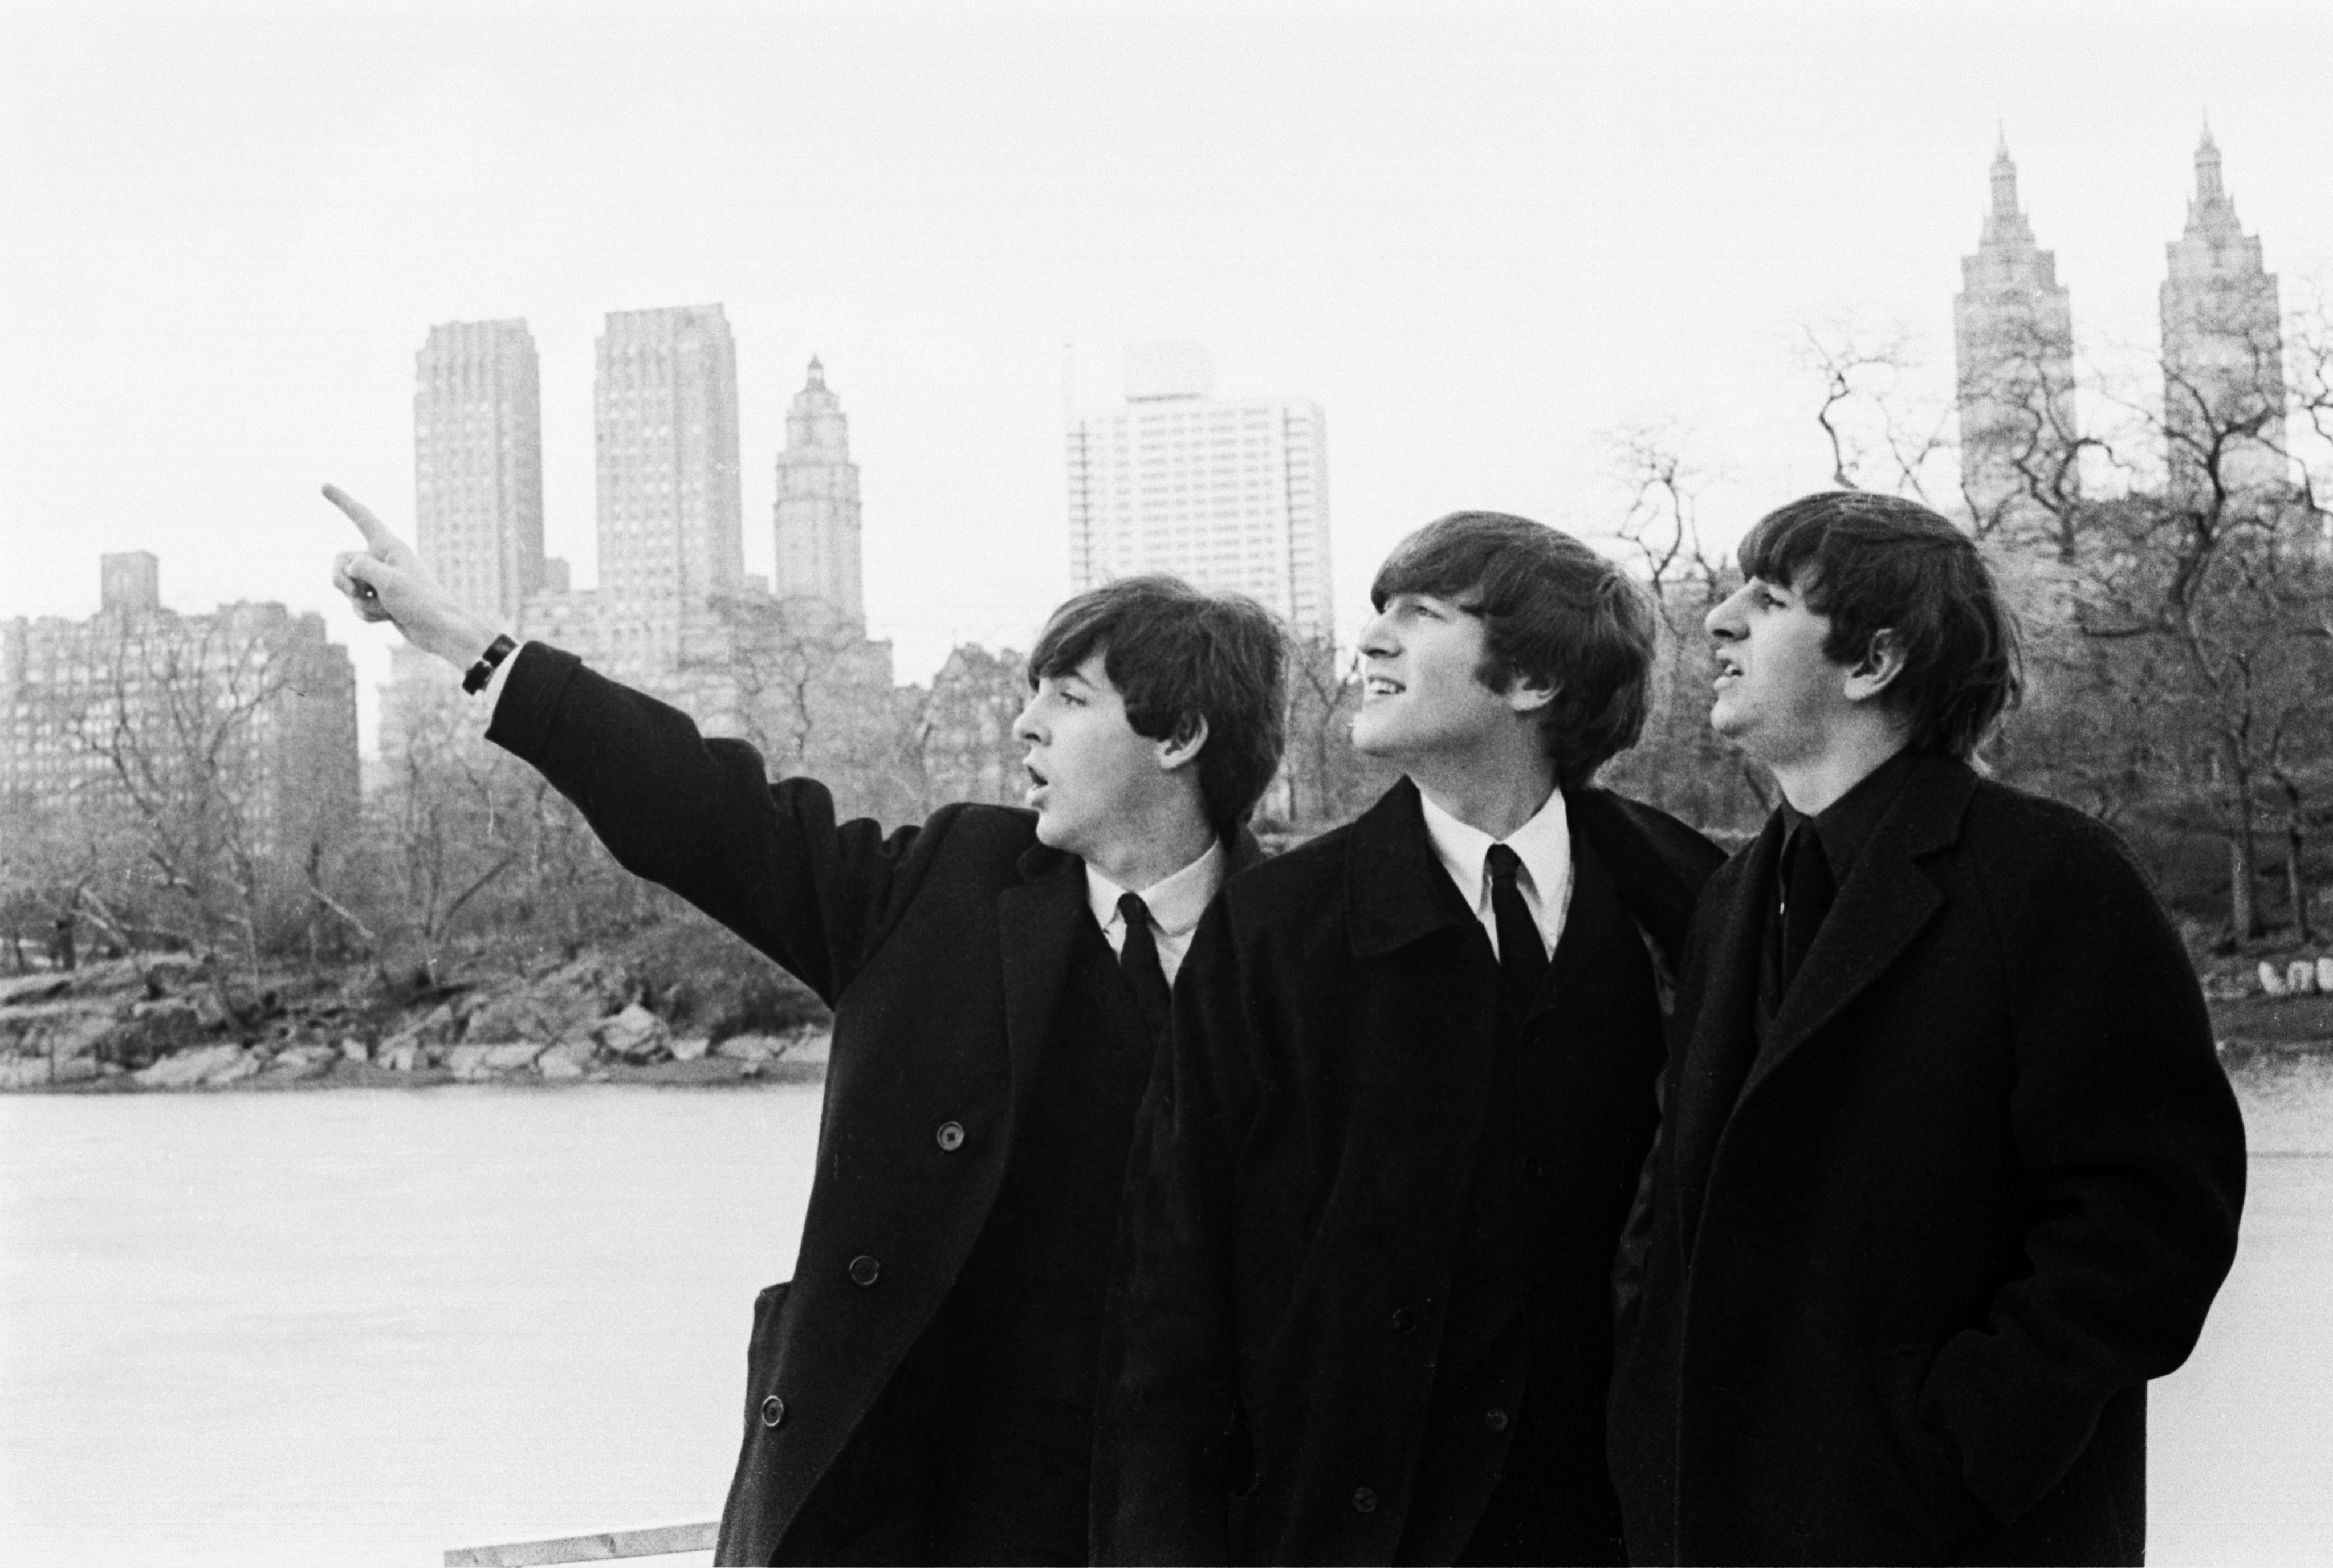 The Beatles in Central Park